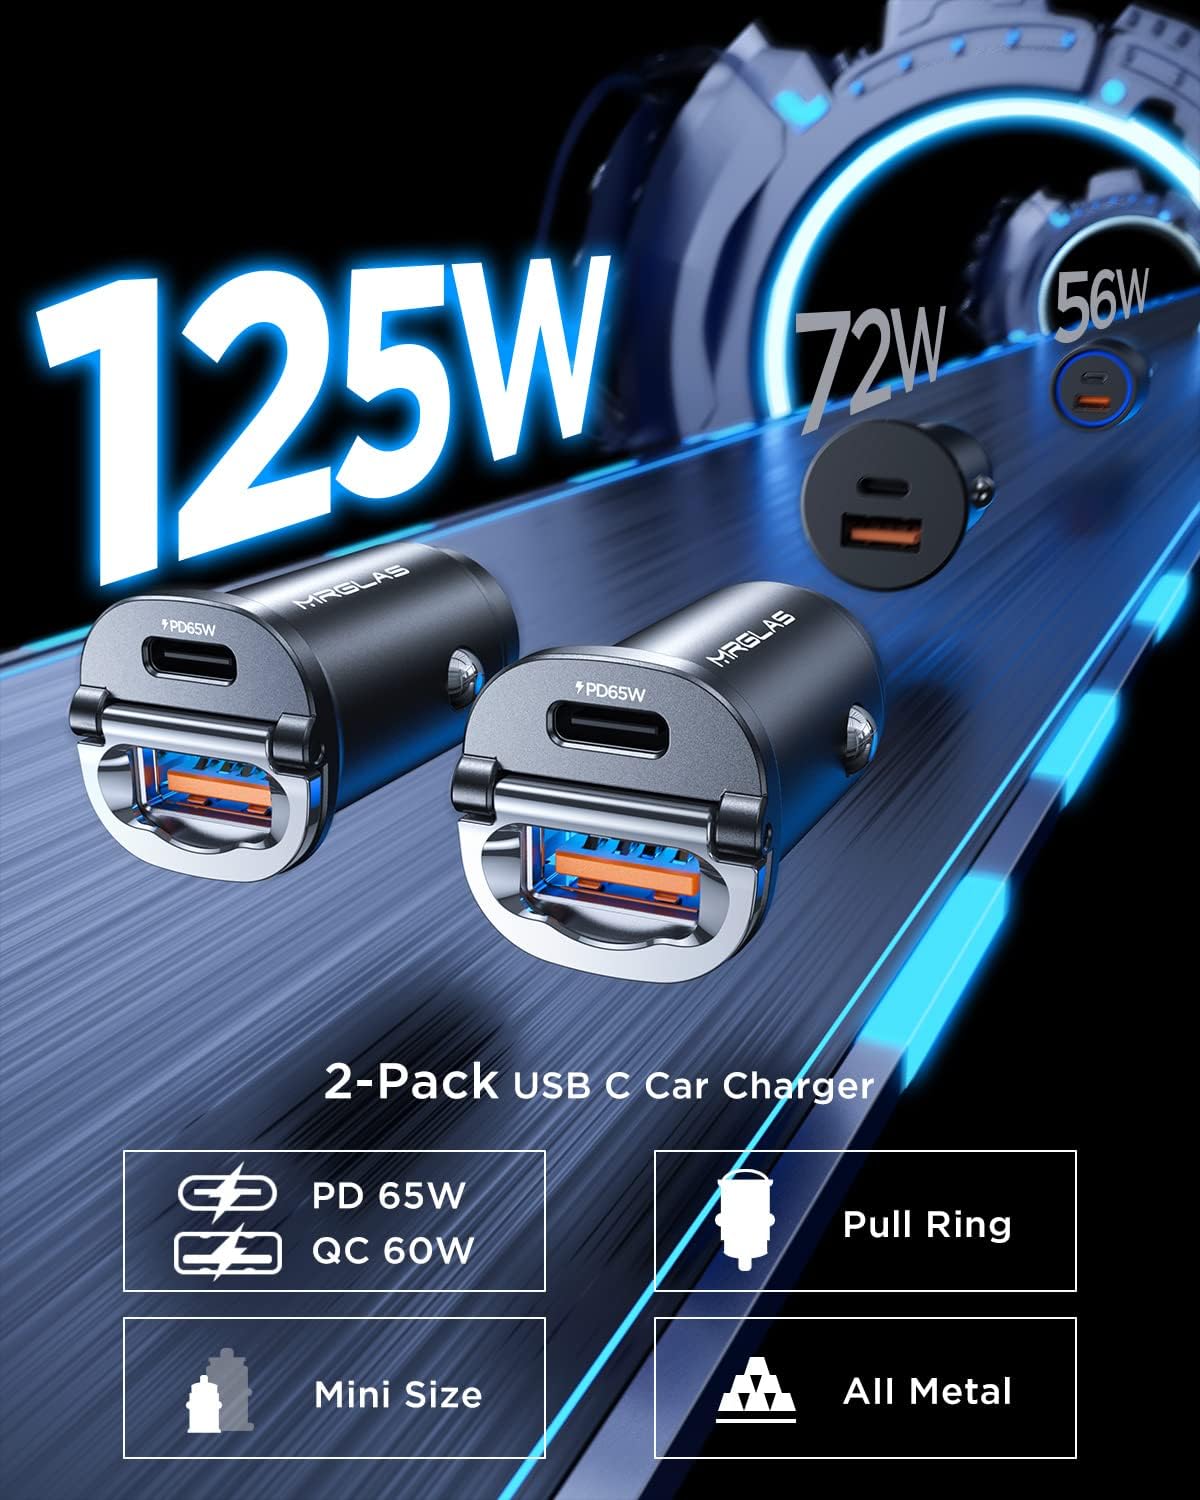 [2-Pack]125W USB C Car Charger, PD65W & QC60W Dual Port Type C Car Cigarette Lighter USB Charger for iPhone 15 14 ProMax iPad Samsung Macbook - Haassue